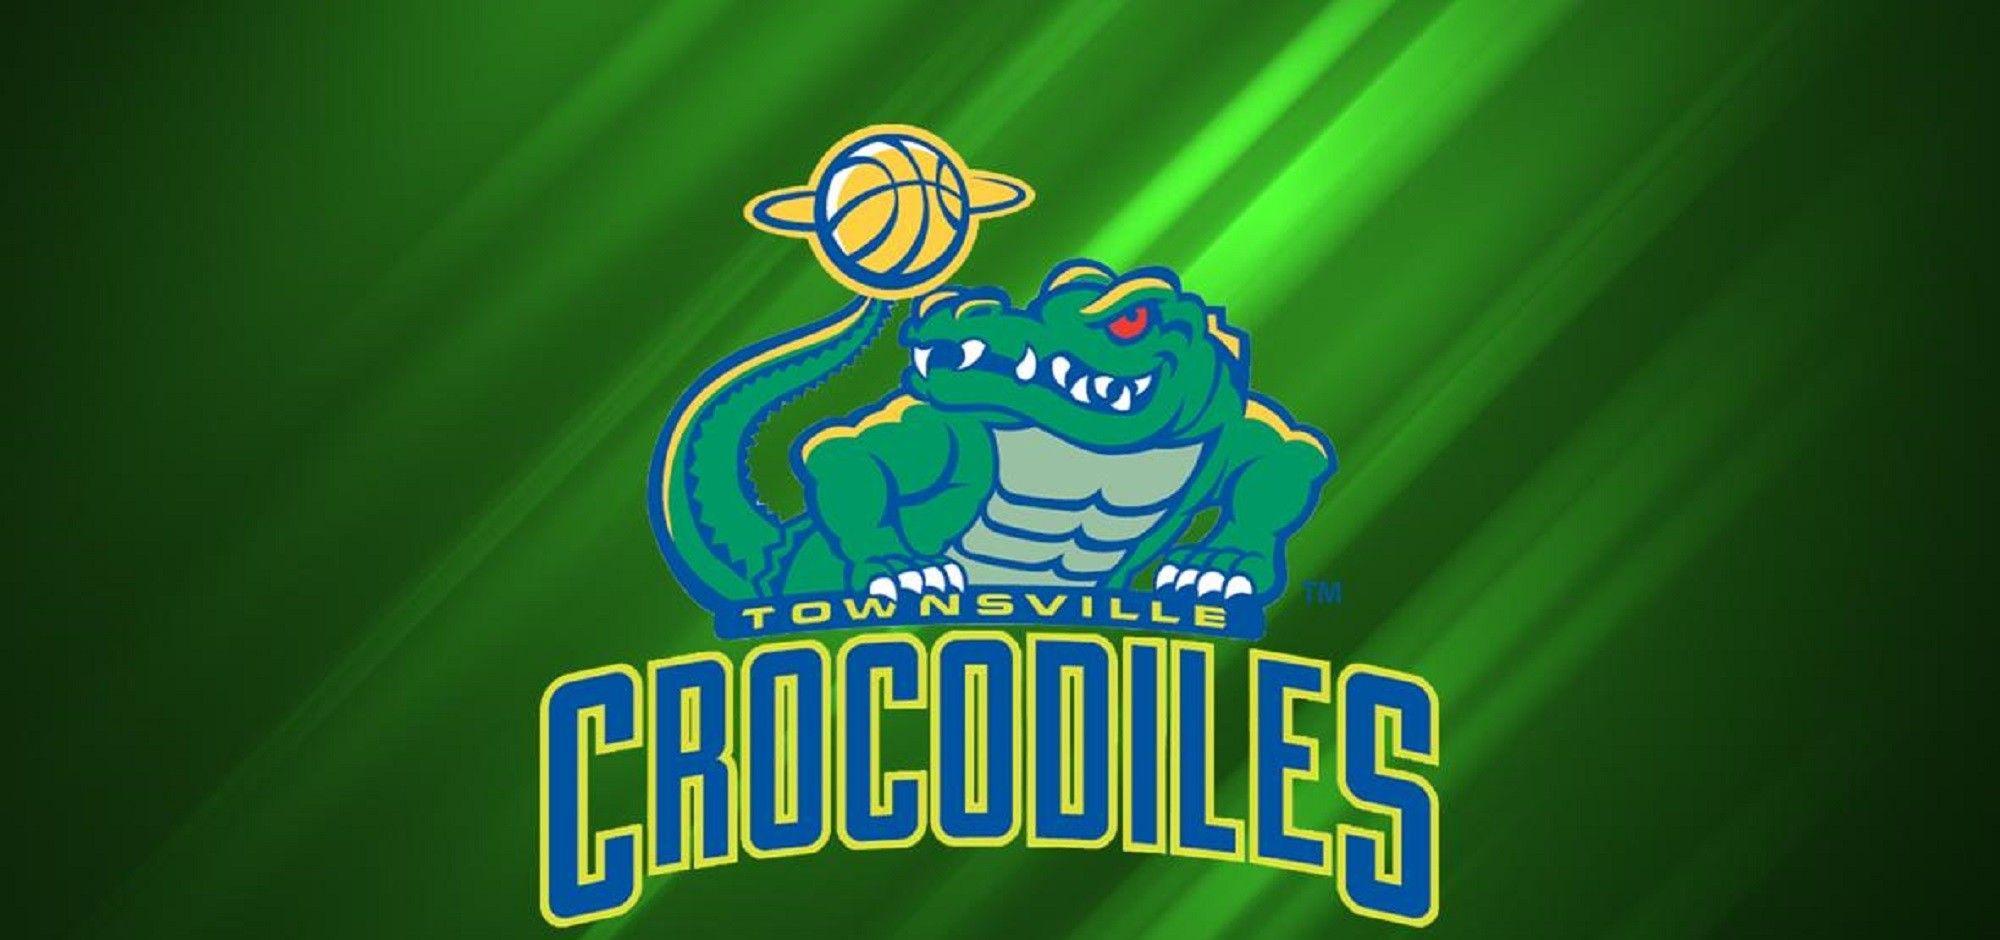 Crocodile Basketball Logo - Where to now for Townsville players after Croc's extinction?